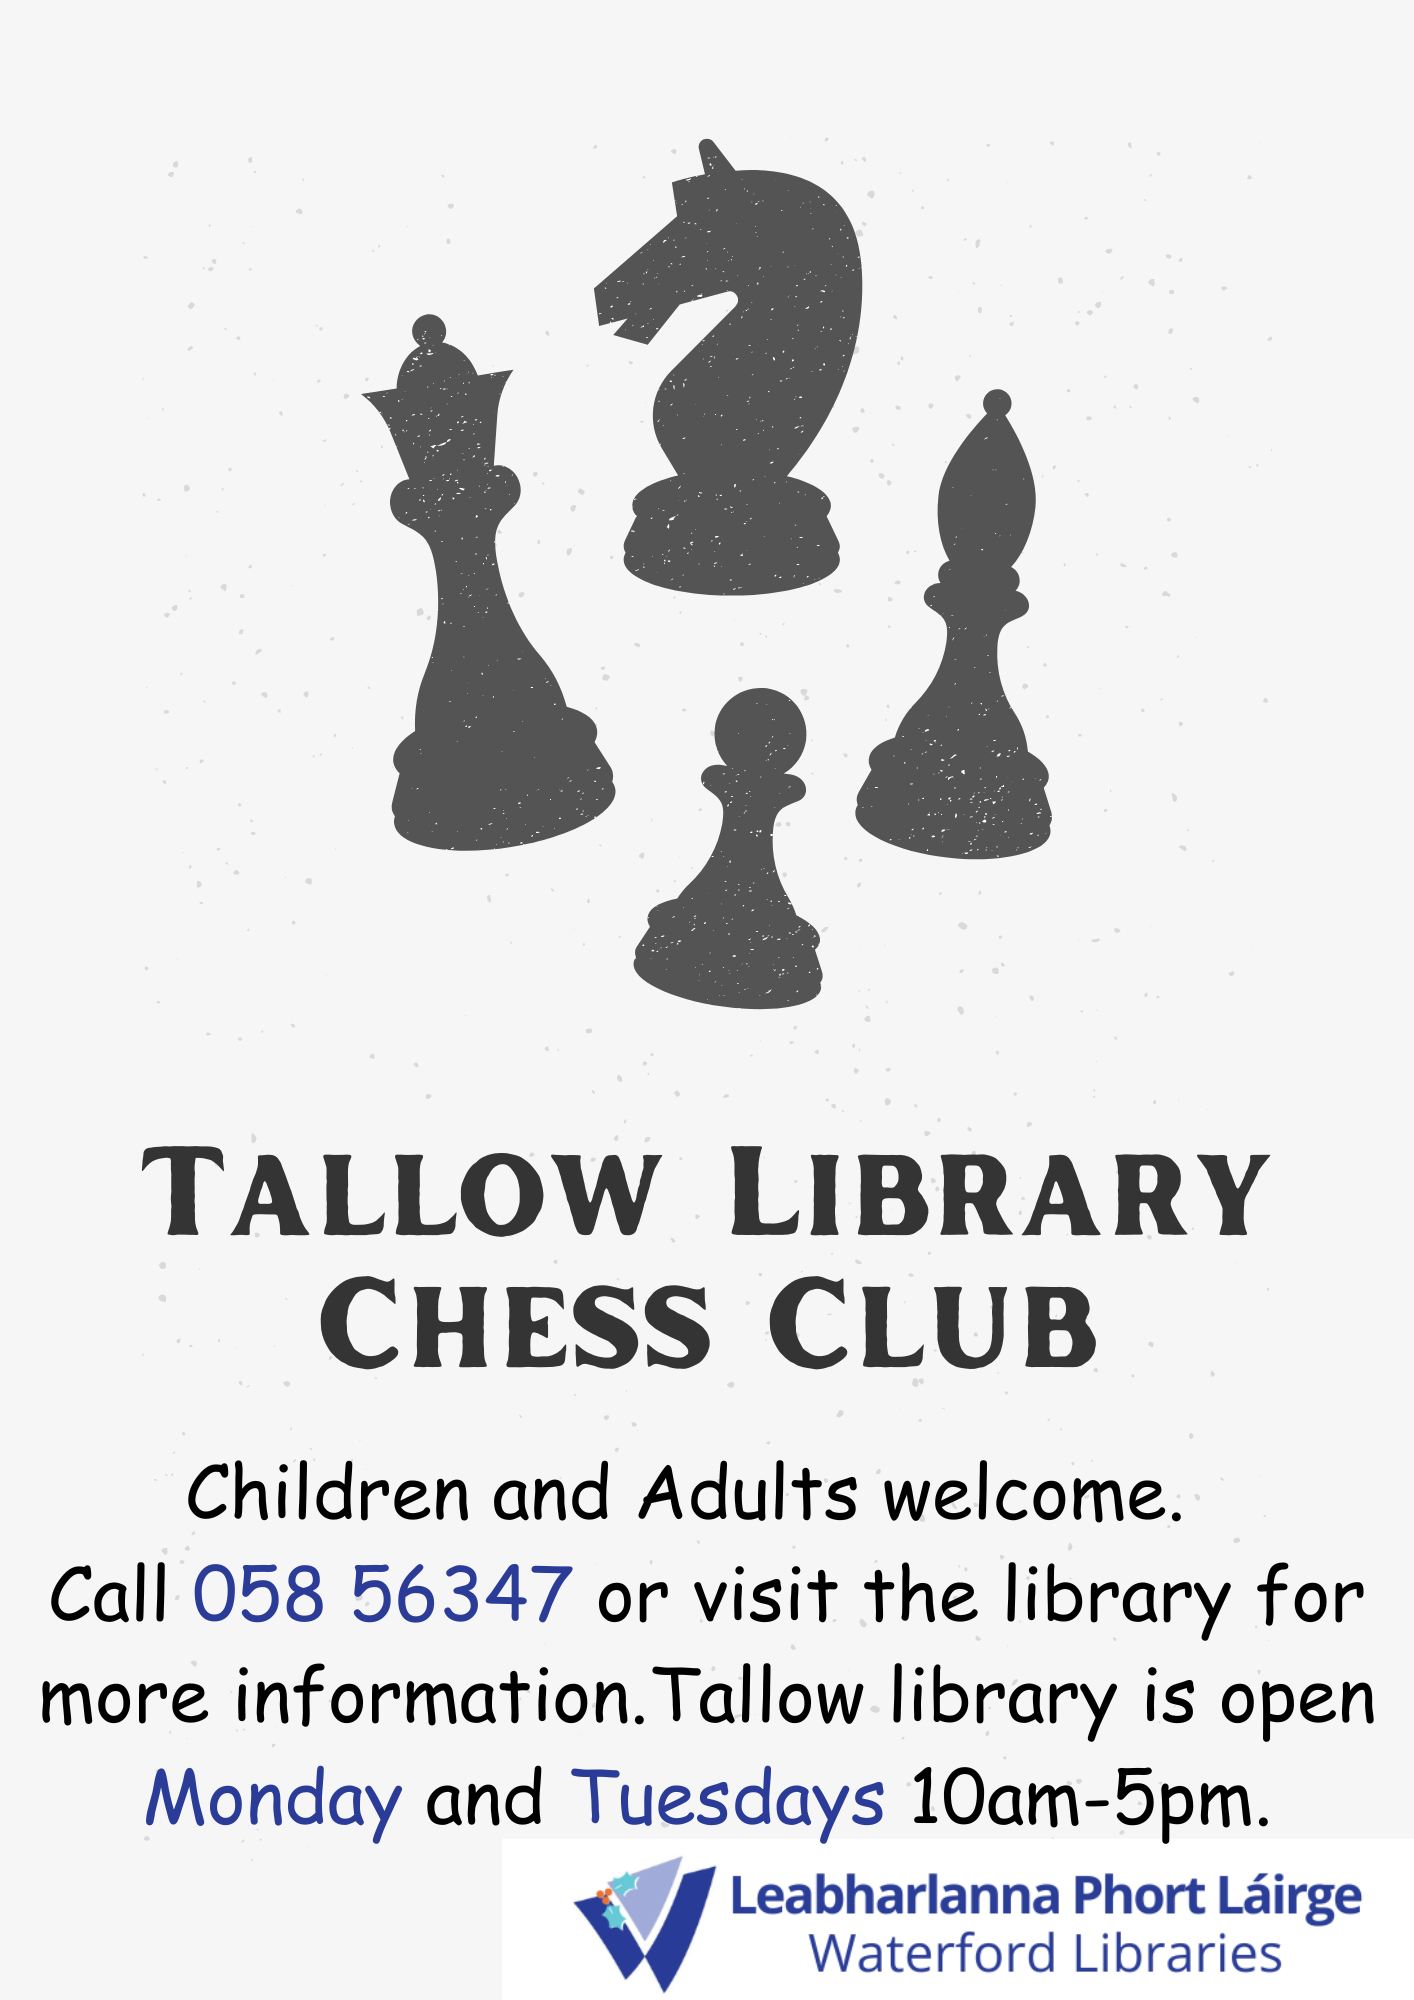 Tallow Library Chess Club 1 copy